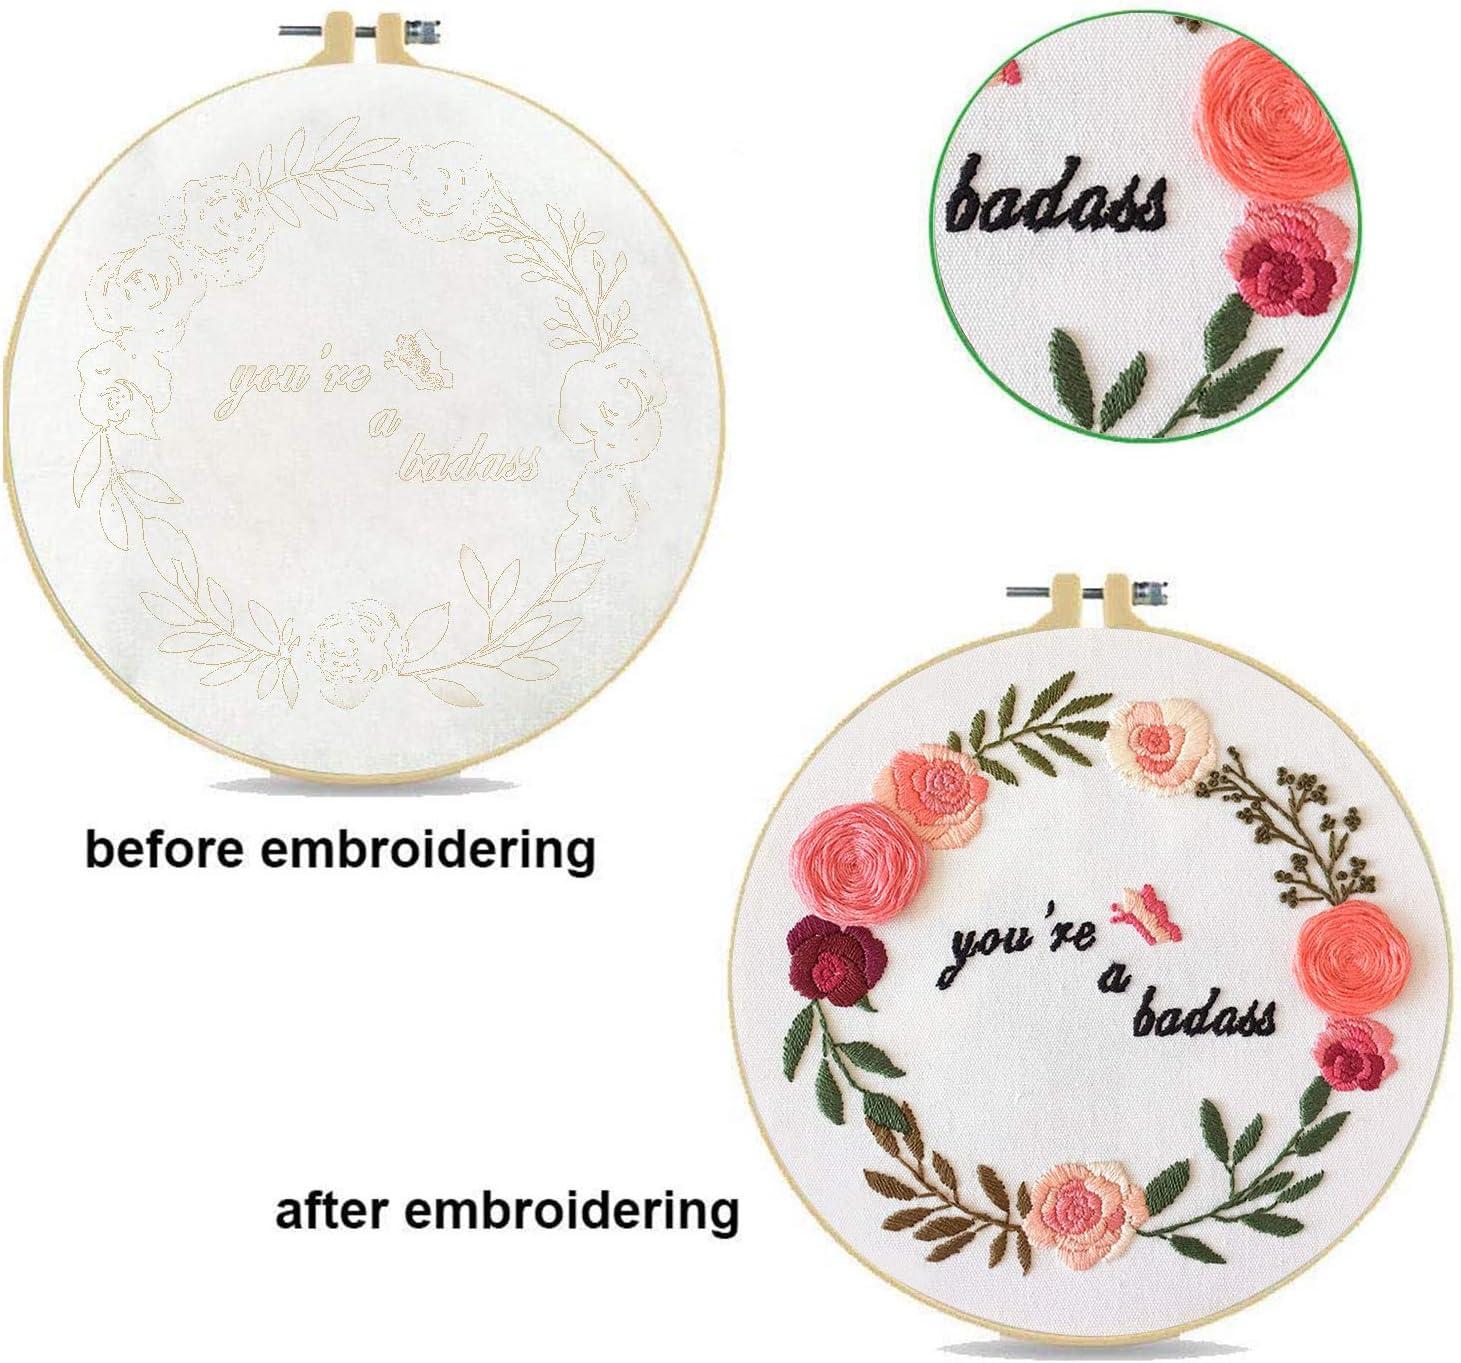 KAMEUN Embroidery Craft Kits for Adults Stamped Cross Stitch Starter for Beginners with Patterns, Needlepoint Funny Hobby Kits with Embroidery Hoops